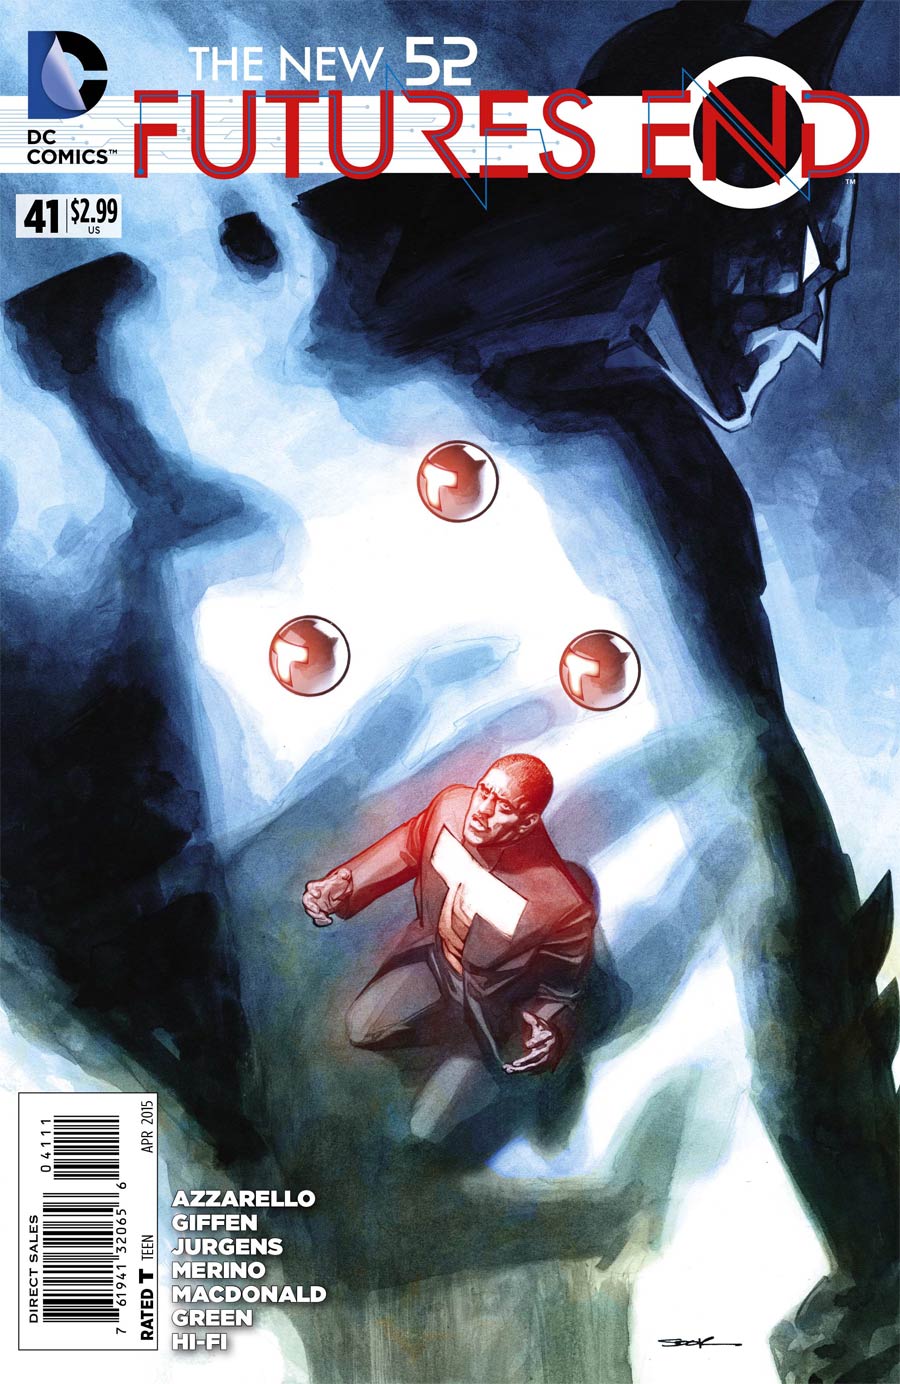 New 52 Futures End #41